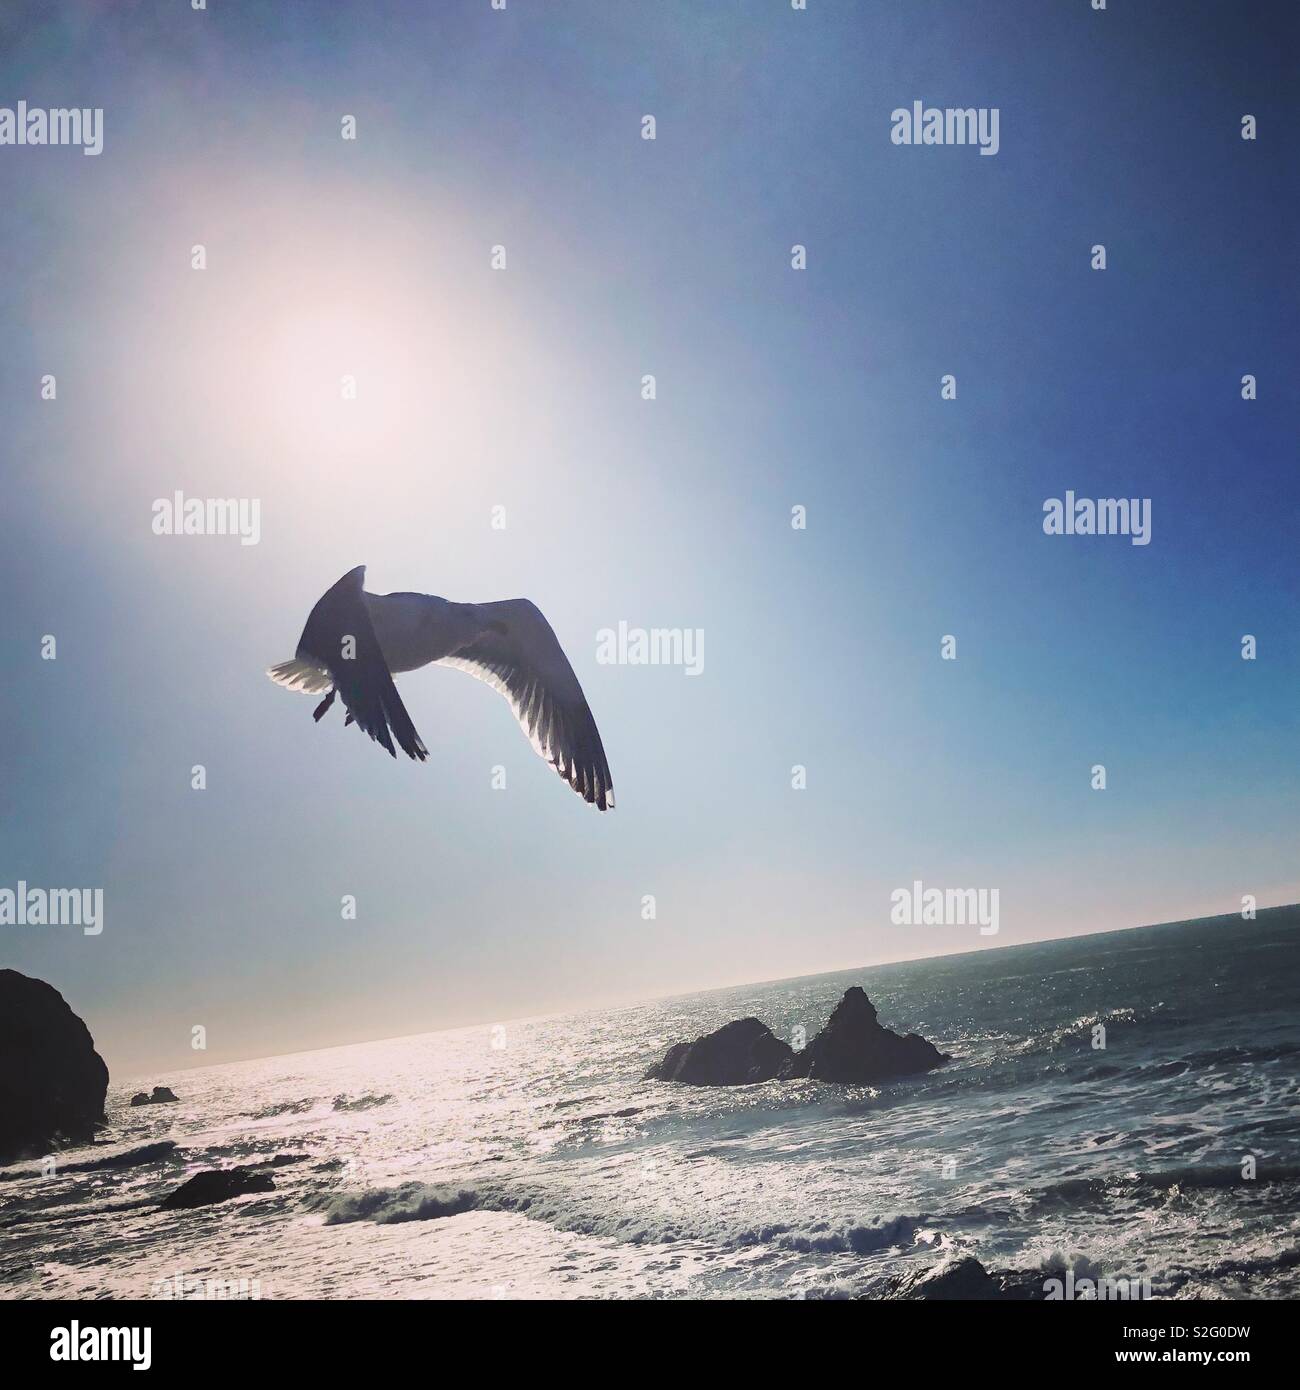 Seagull in flight over the ocean. Close up, waves breaking, sunlight in the background. Action shot. Stock Photo